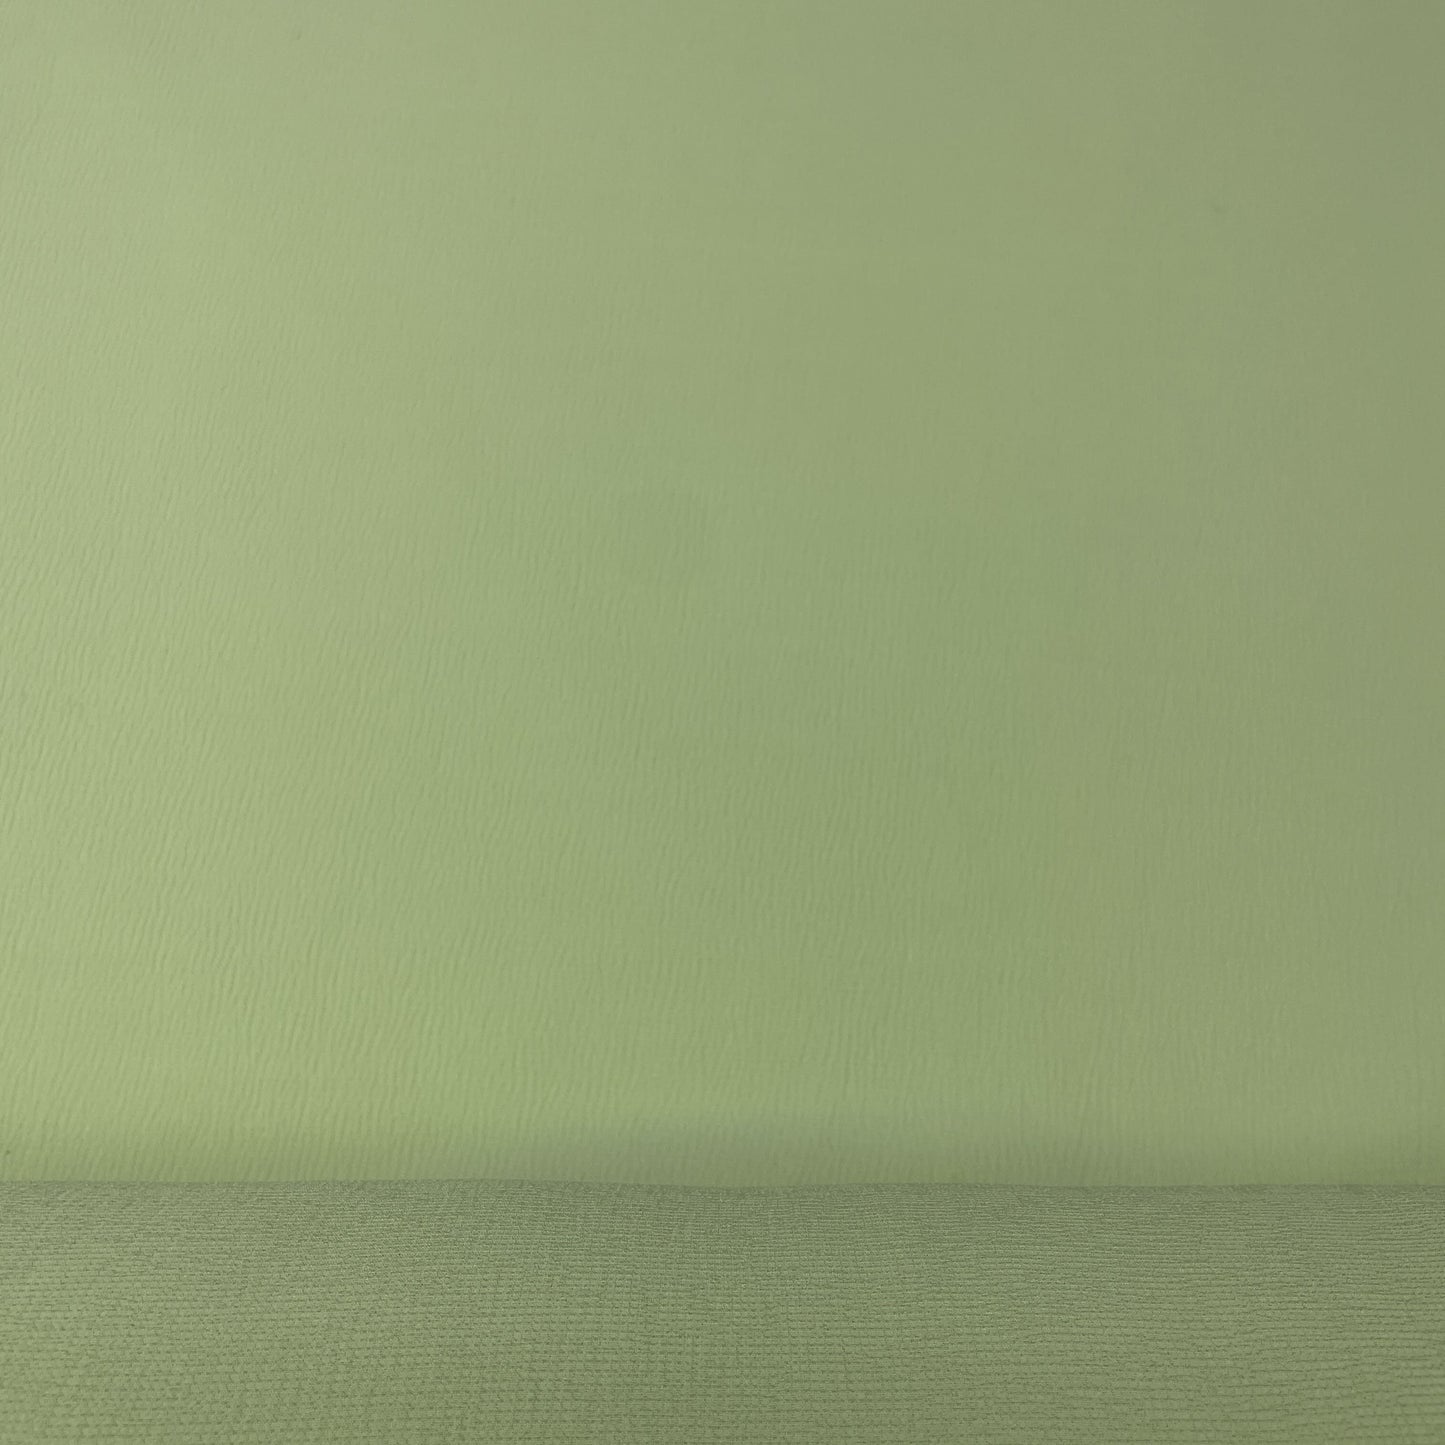 Pista Green Solid Knitted Lycra Fabric - TradeUNO